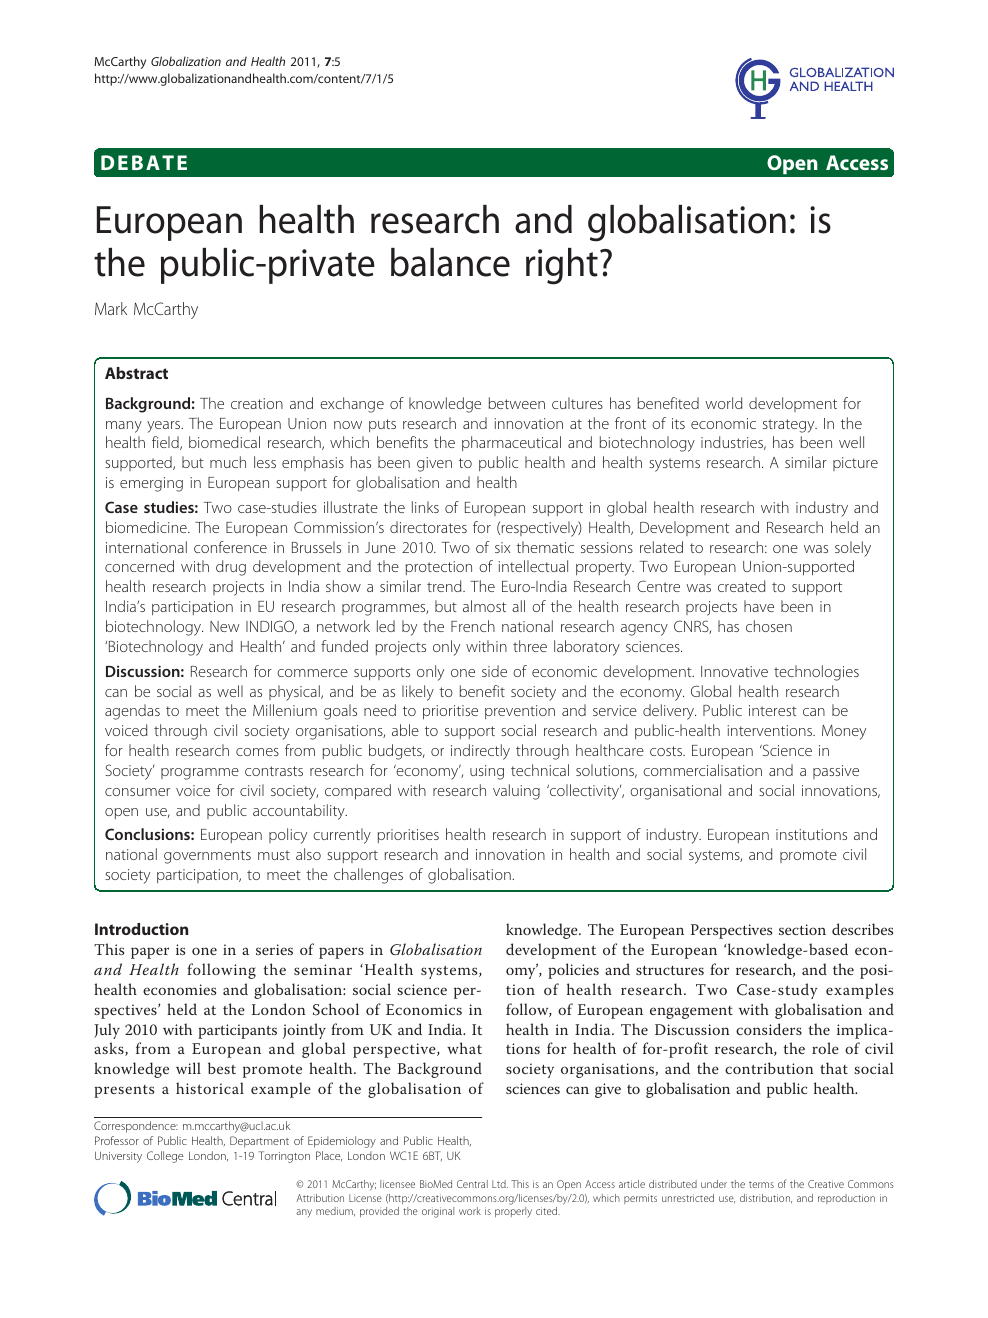 European Health Research And Globalisation Is The Public Private Balance Right Topic Of Research Paper In Economics And Business Download Scholarly Article Pdf And Read For Free On Cyberleninka Open Science Hub